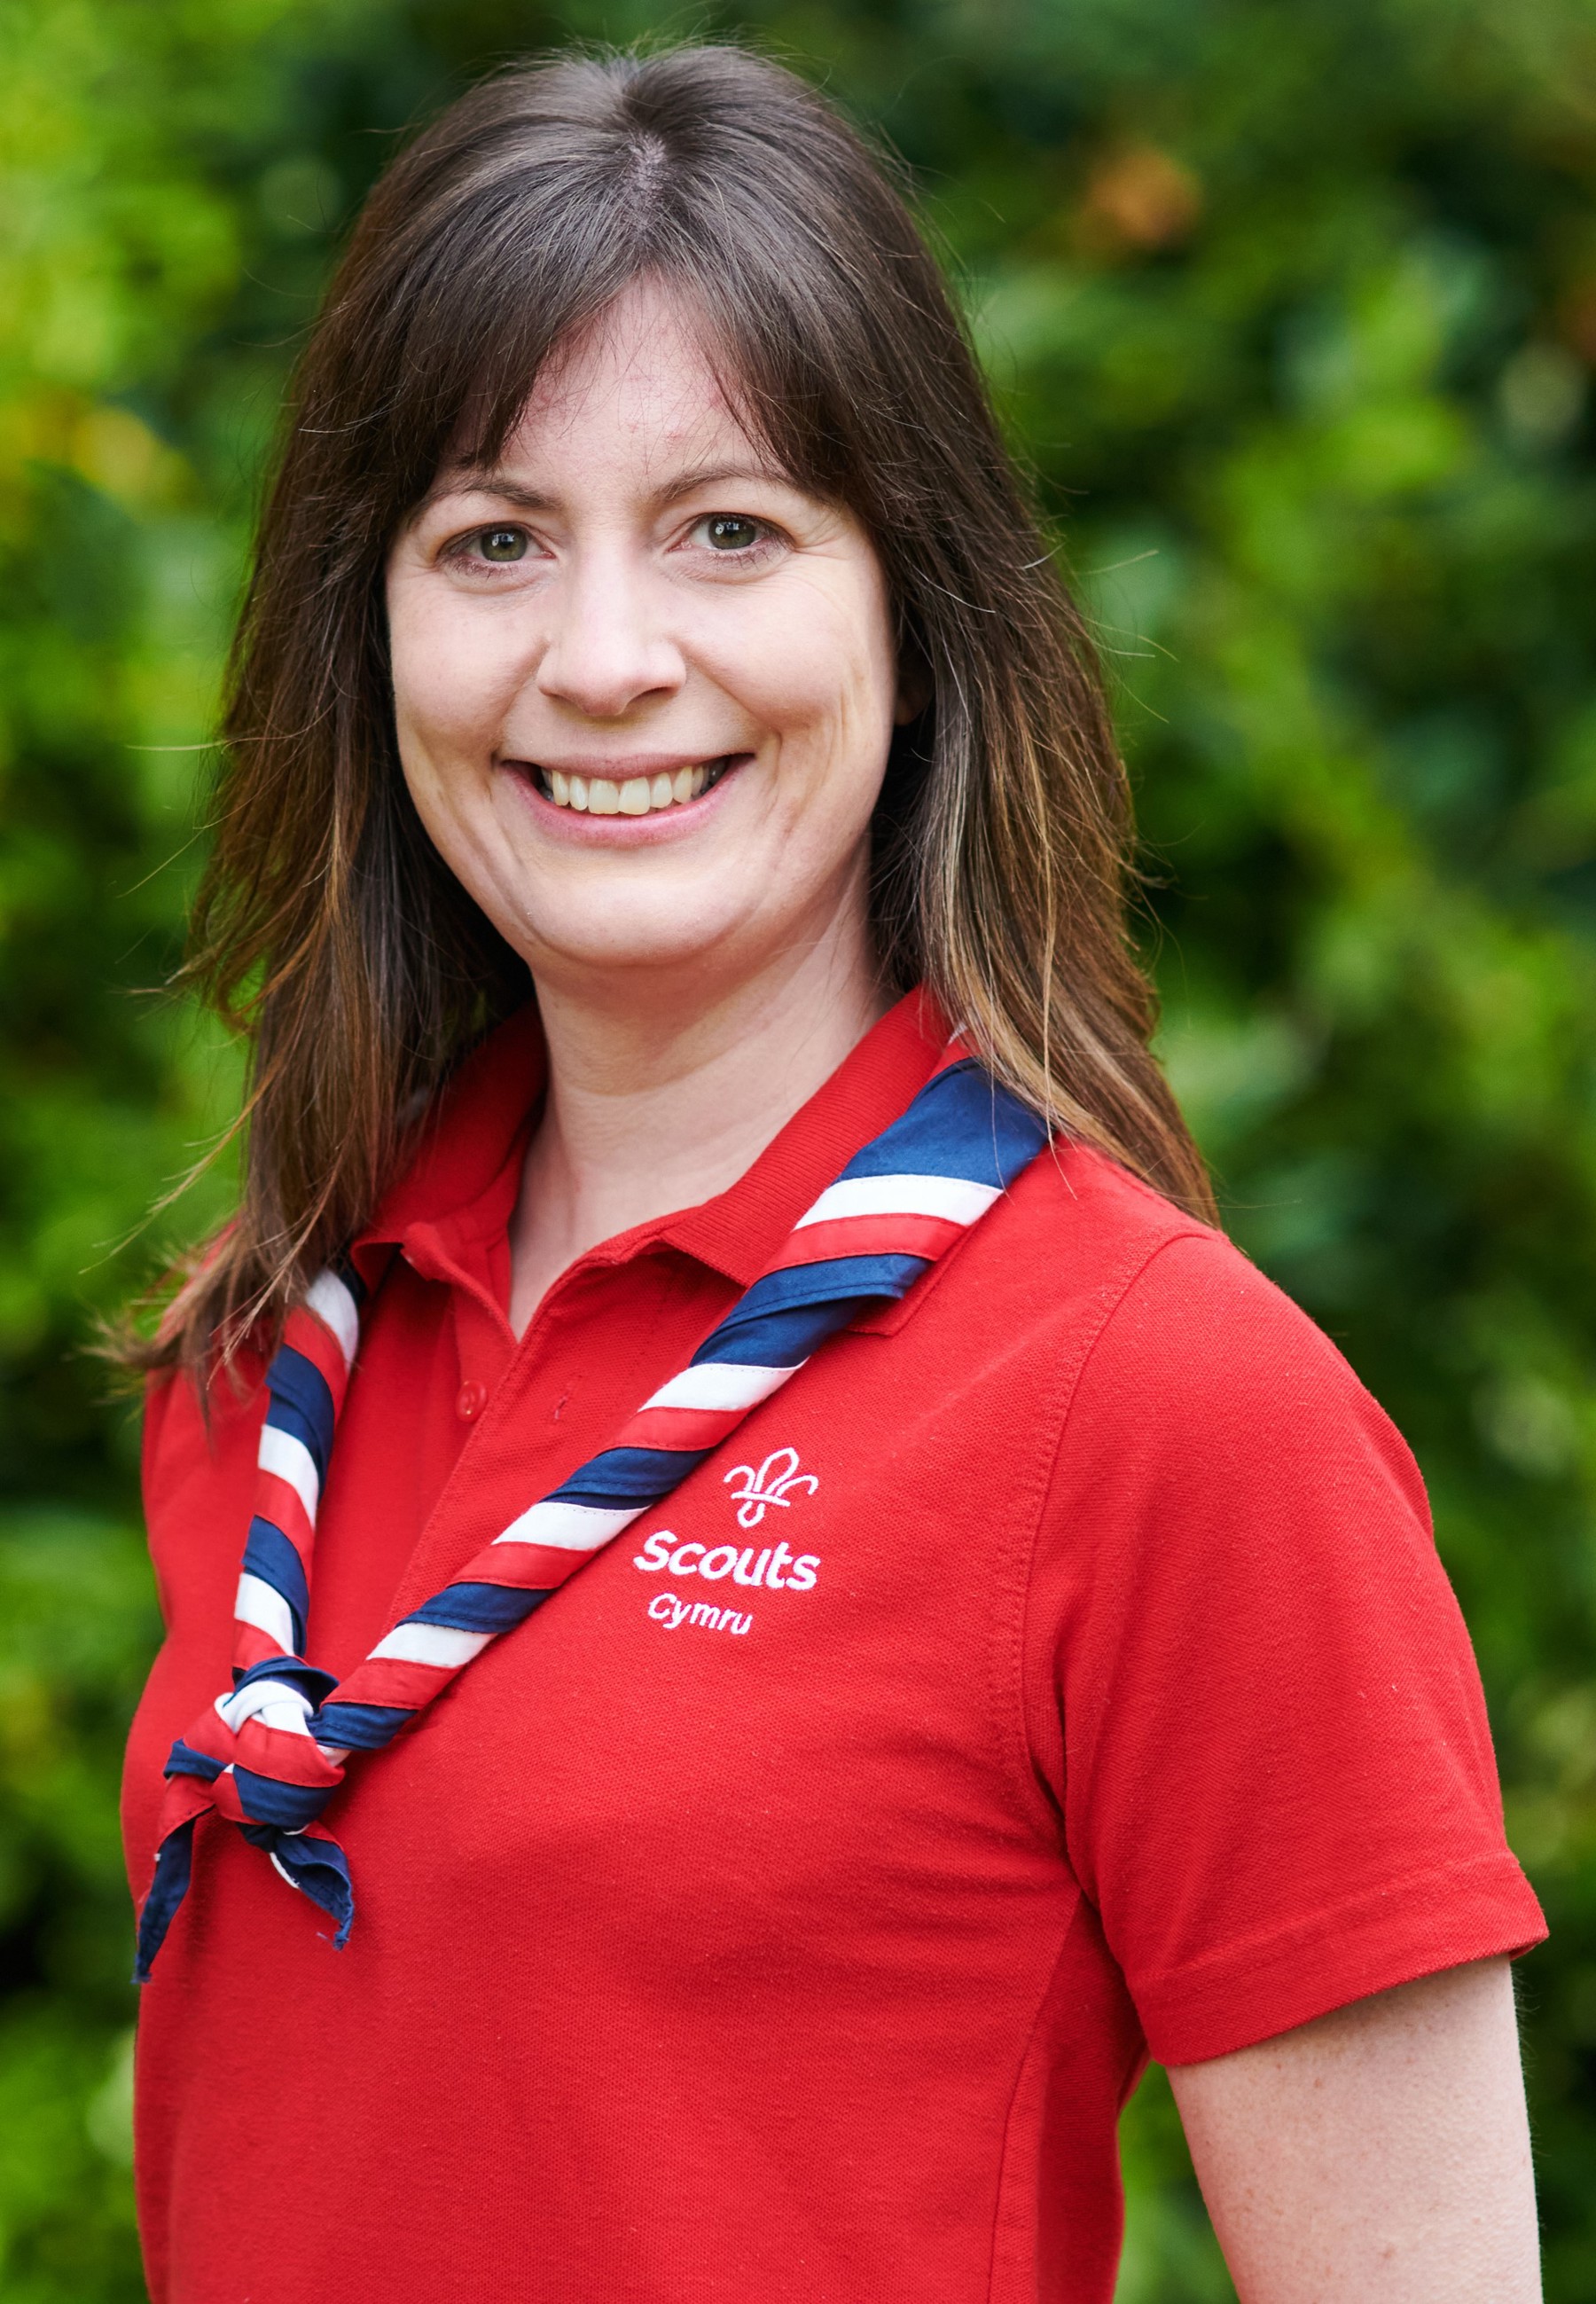 Rhian Moore smiling at the camera while wearing a red Scouts polo shirt and stripy scarf